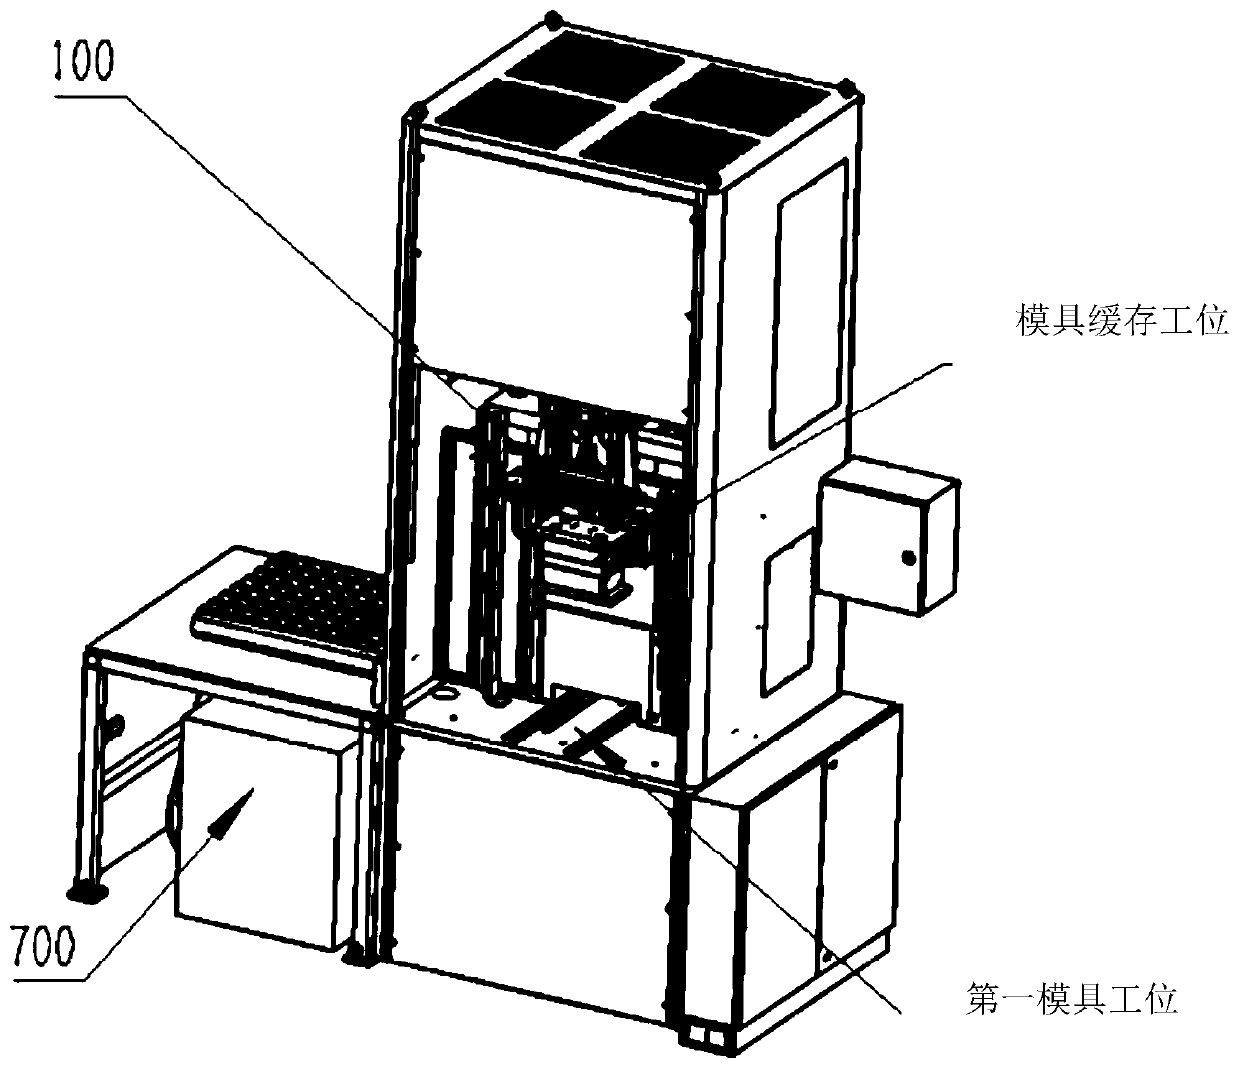 Automatic die opening and closing and cleaning device for thermoset composite die-pressing die